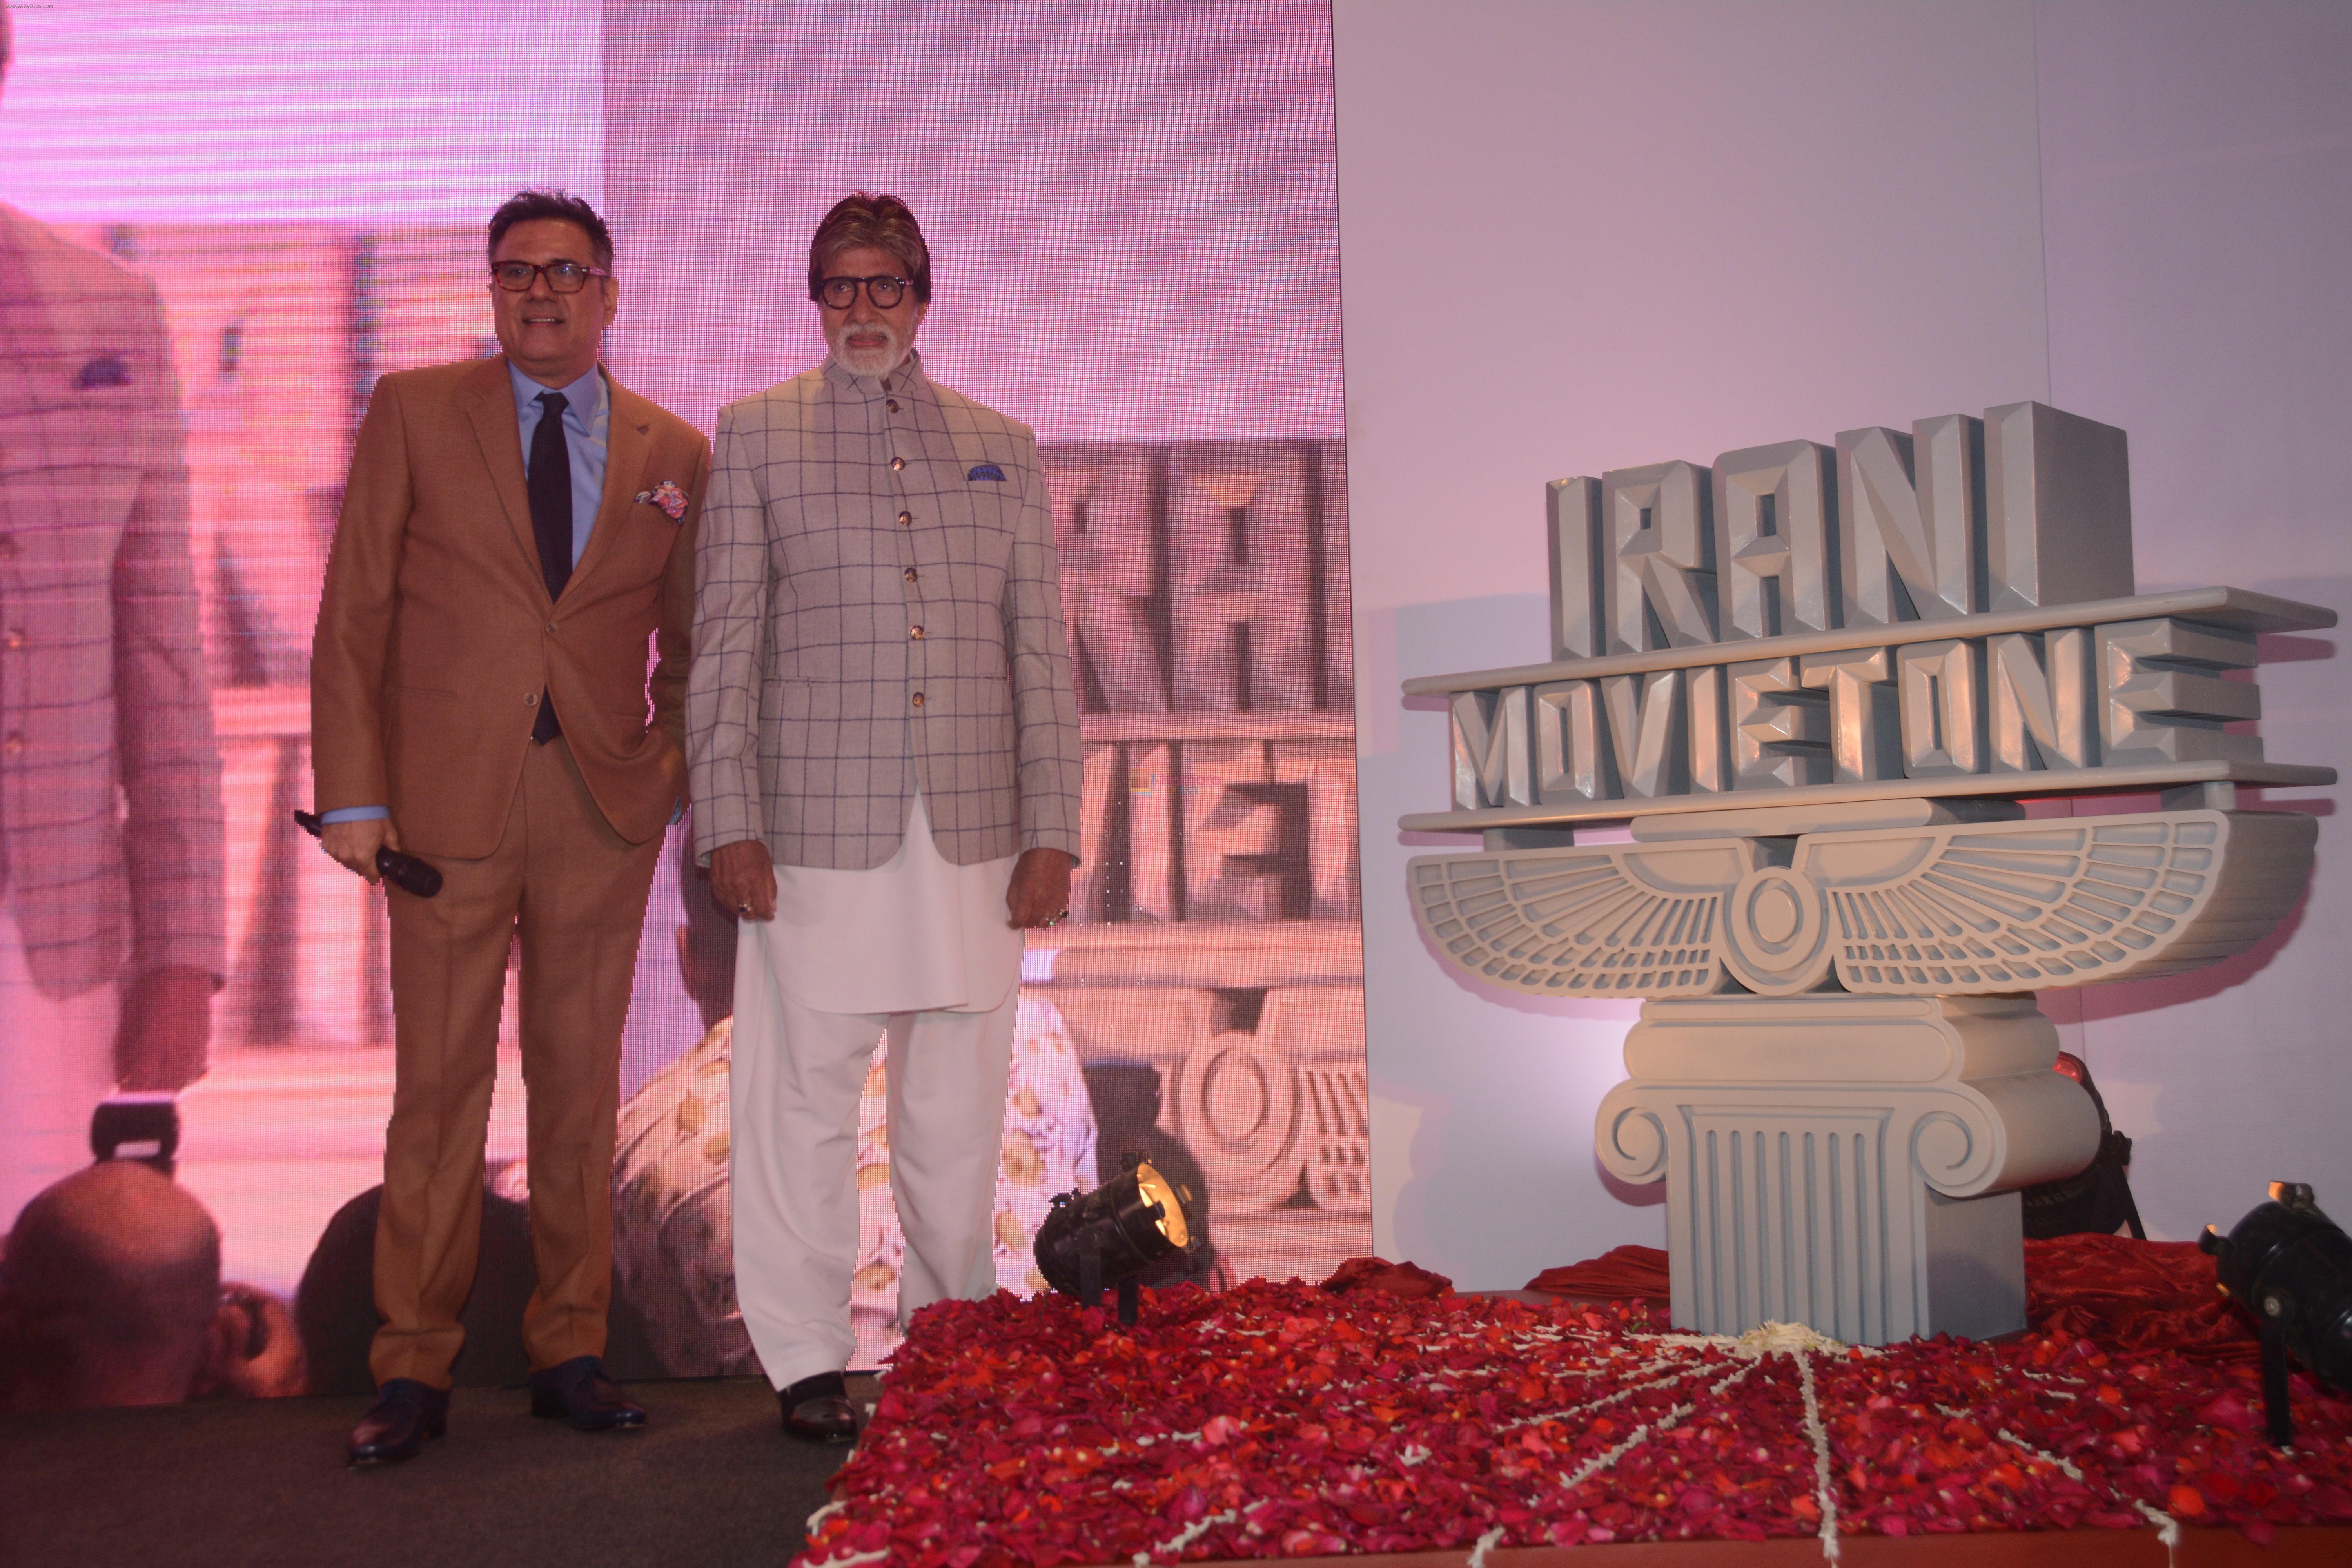 Amitabh Bachchan at the launch of Boman Irani's production at jw marriott juhu on 24th Jan 2019